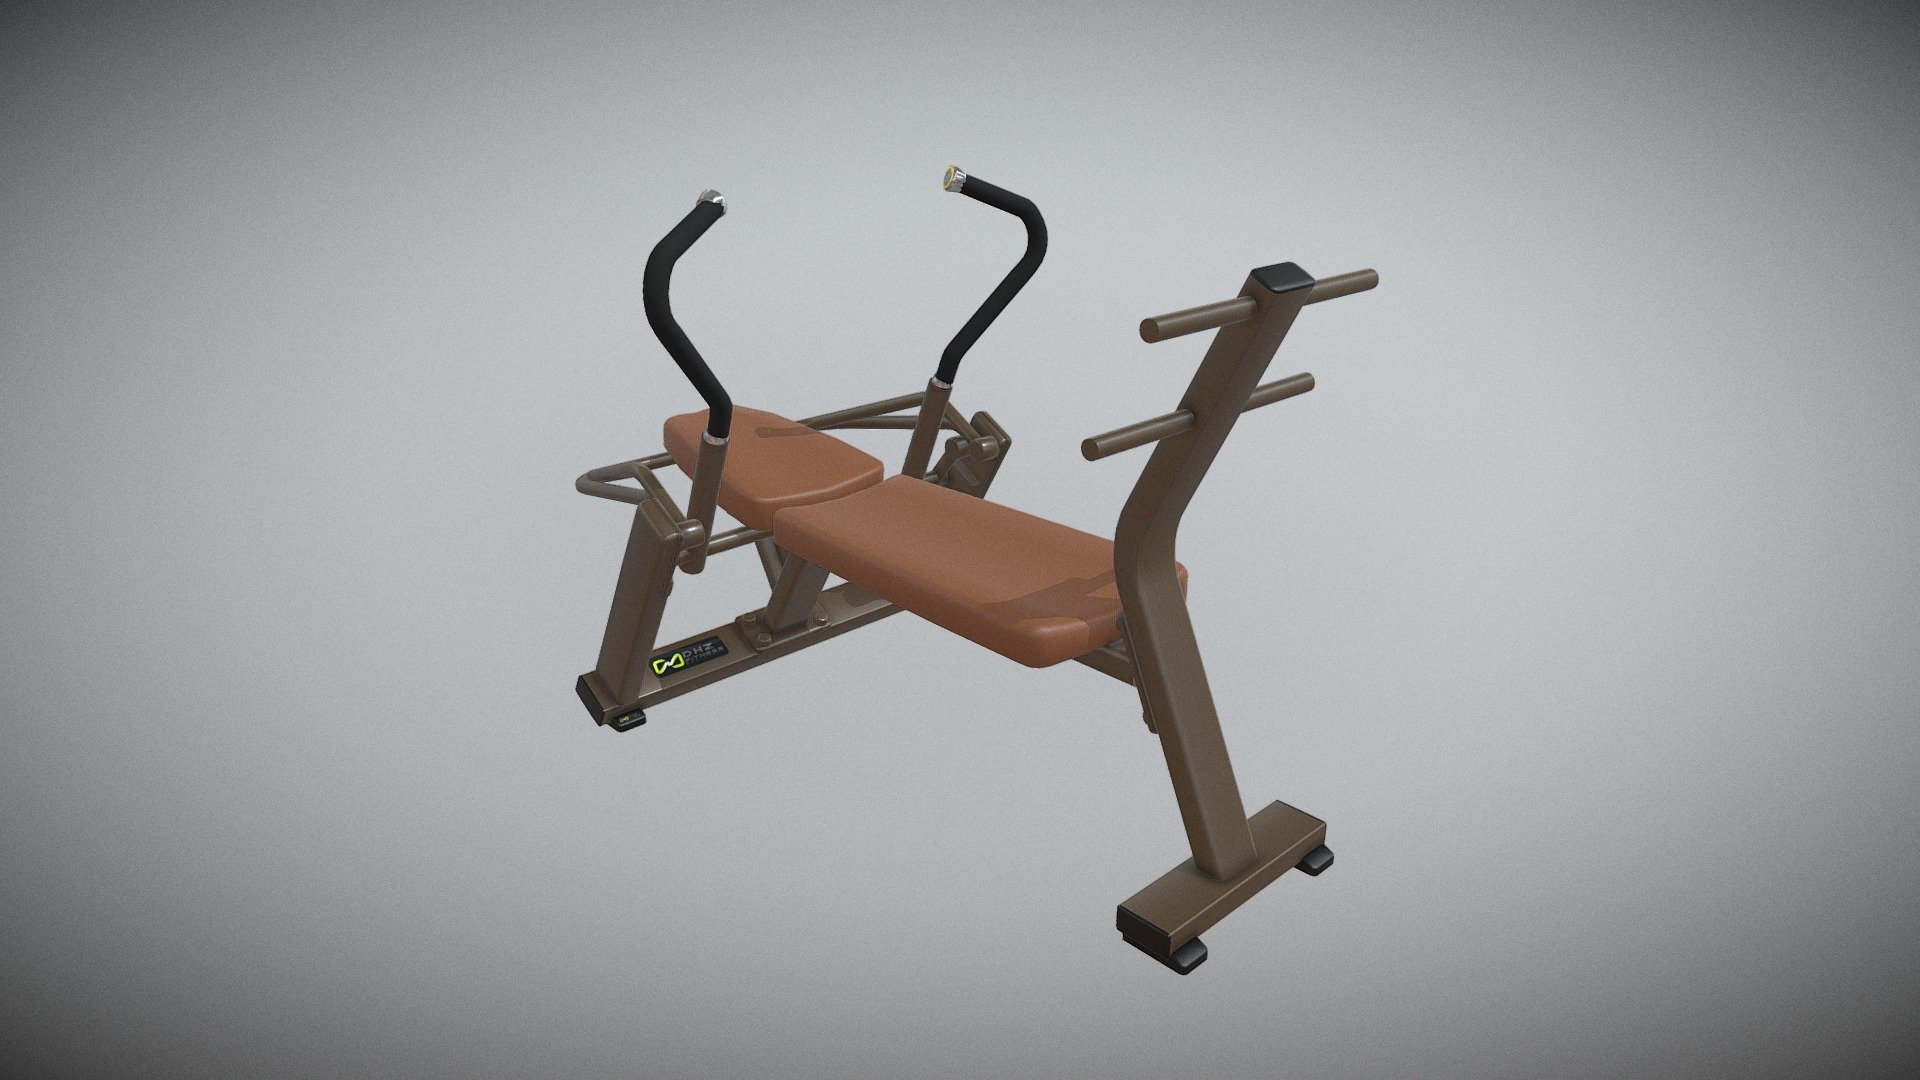 http://dhz-fitness.de/style-1#E1070 - ABDOMINAL TRAINER - 3D model by supersport-fitness 3d model